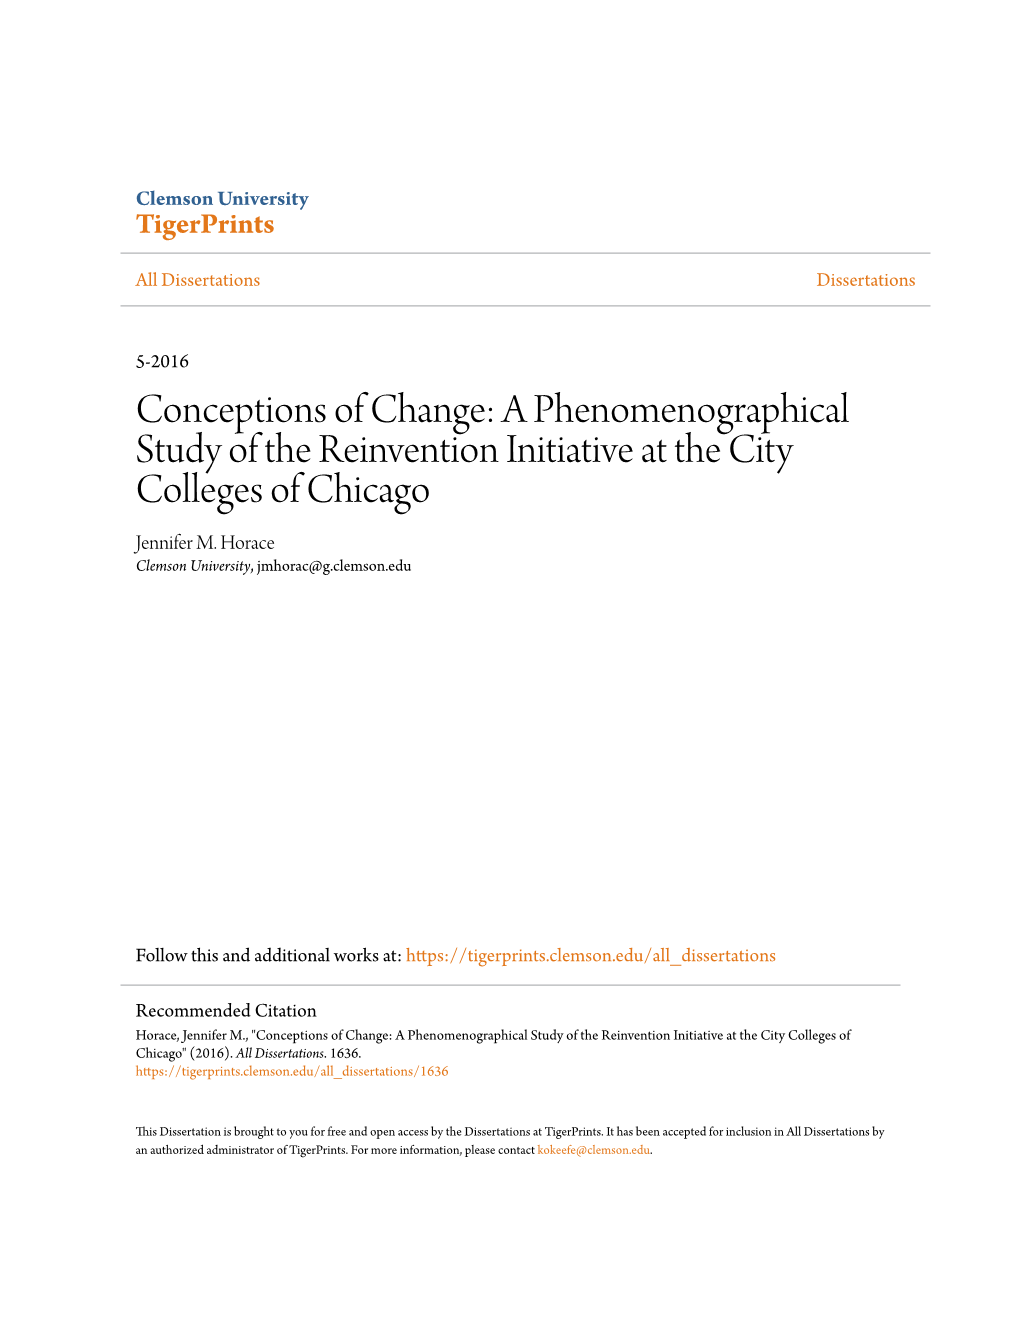 A Phenomenographical Study of the Reinvention Initiative at the City Colleges of Chicago Jennifer M